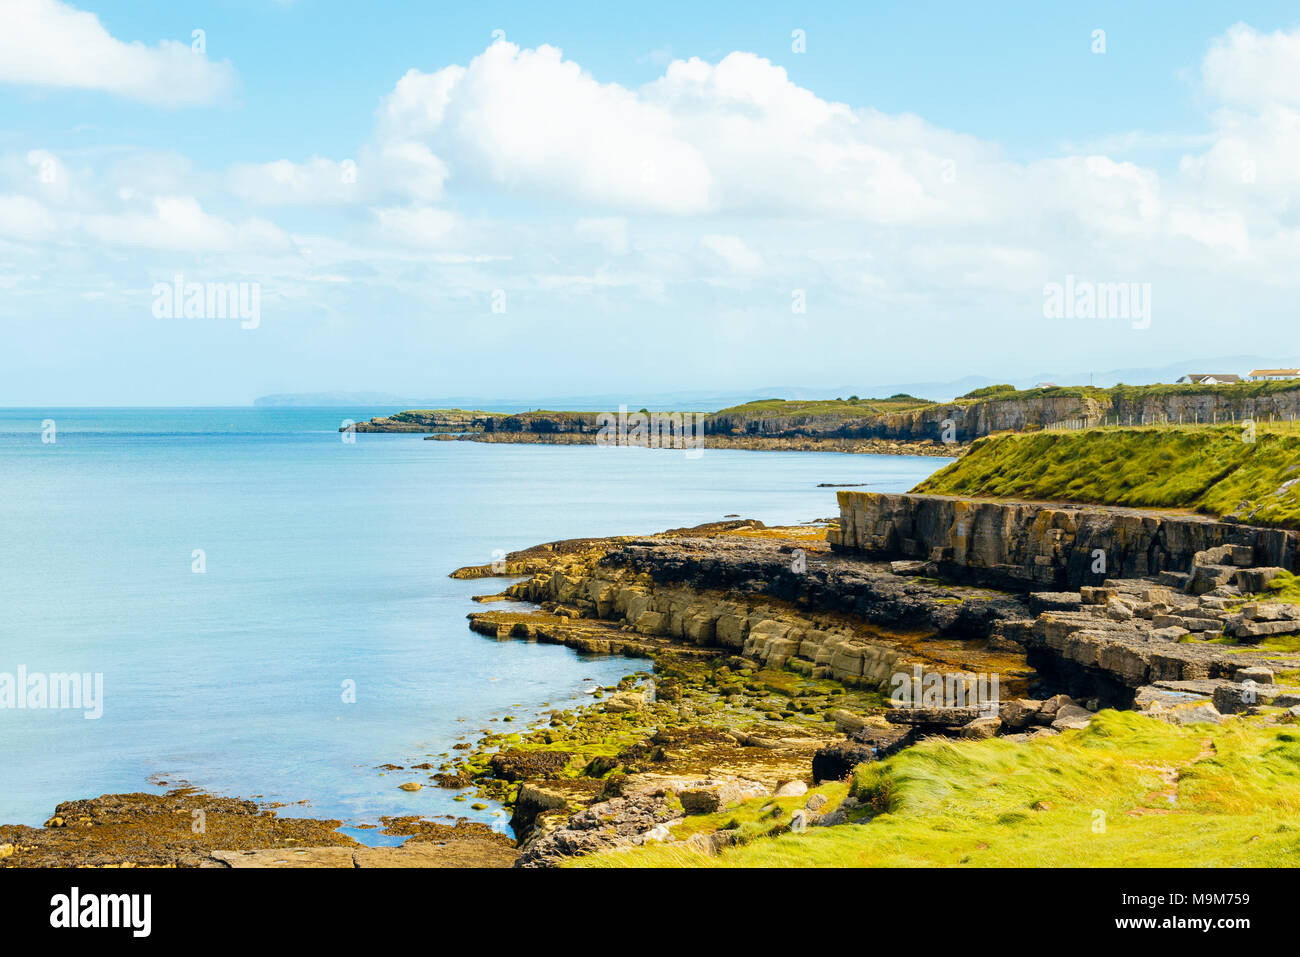 Coastline near Moelfre, Anglesey, Wales. Llandudno's Great Orme appears on the horizon. Stock Photo